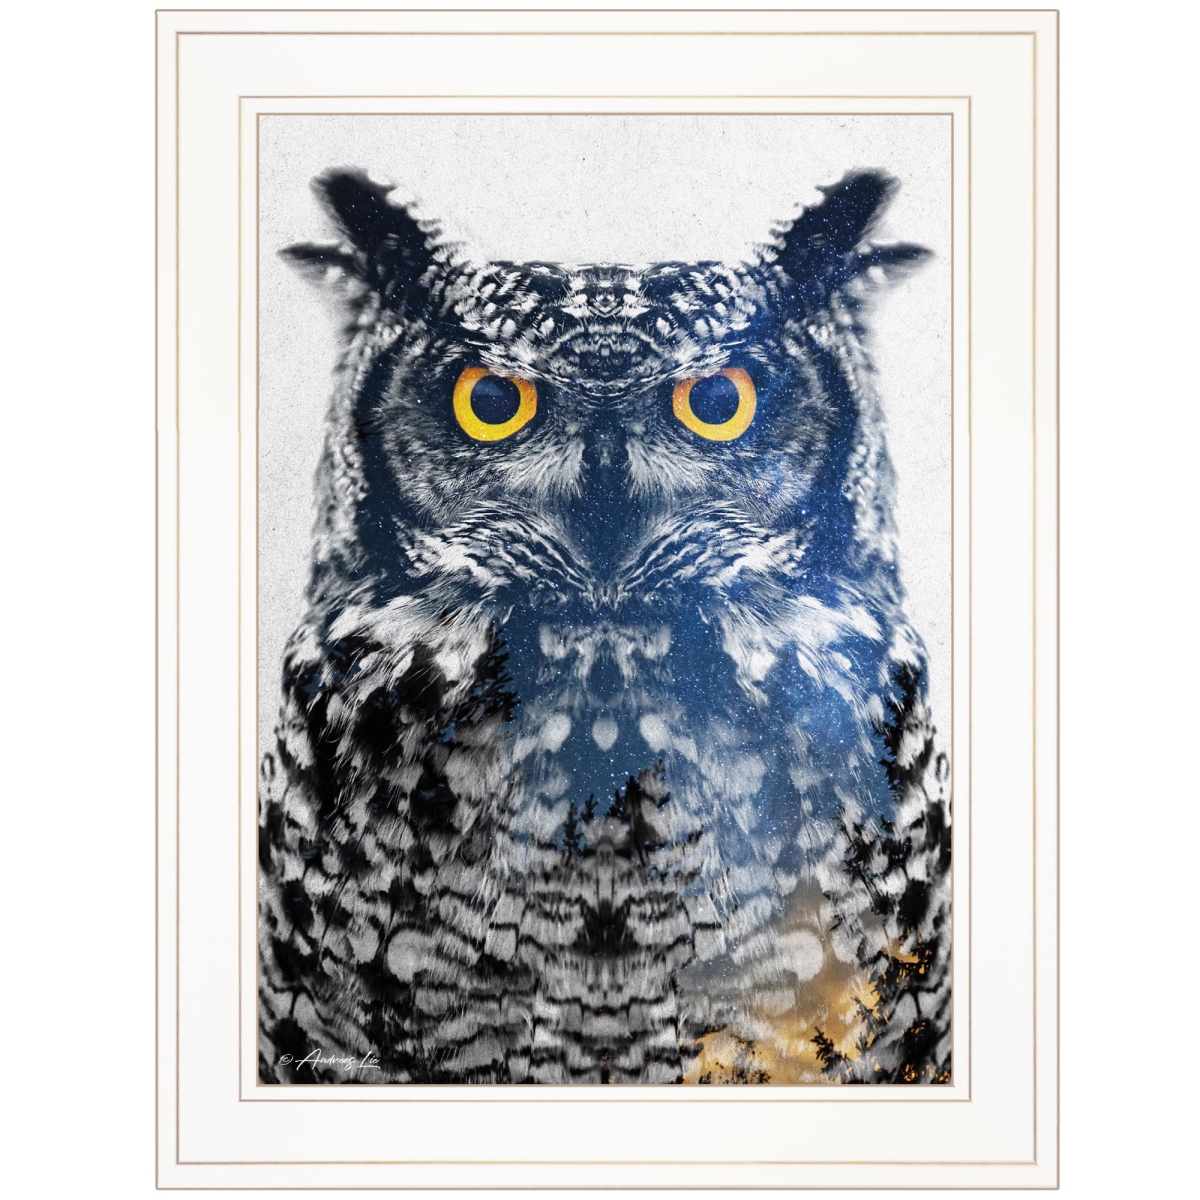 HomeRoots 405102 19 x 15 x 1 in. Night Owl 2 White Framed Print Wall Art